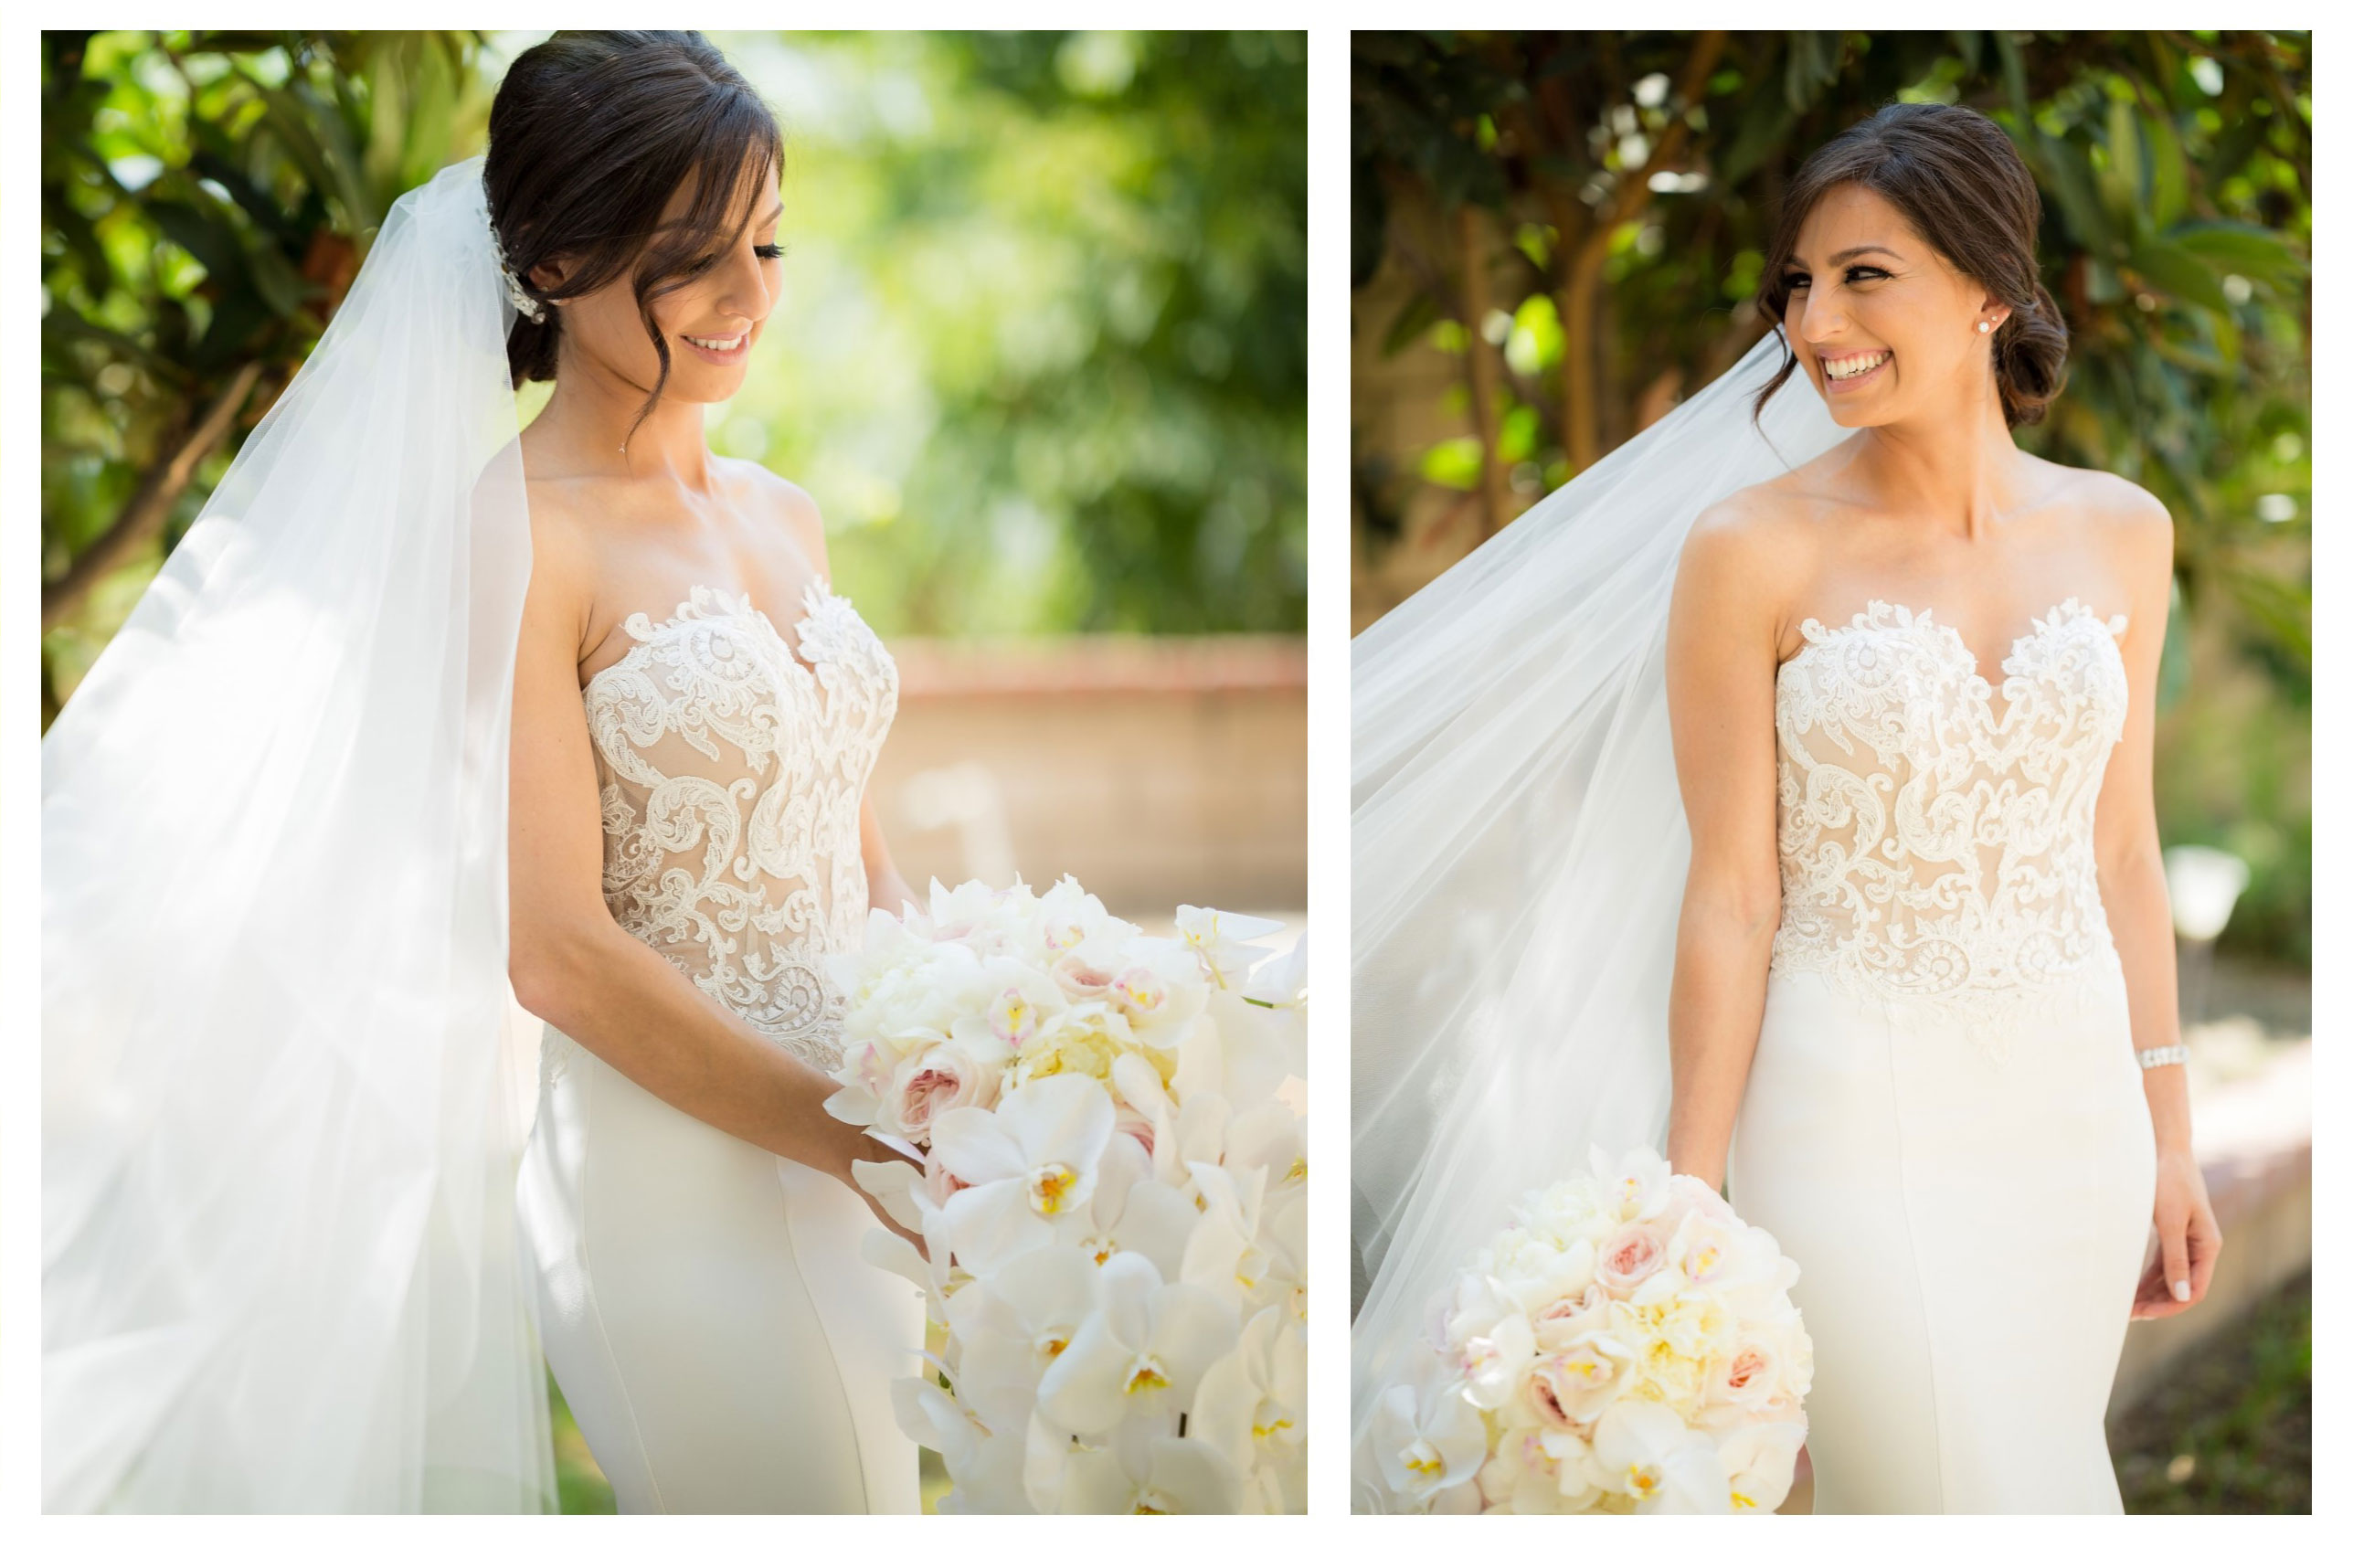 Wedding Workshop Three | Photographing The Bride: Find A Better Angle or Crop In